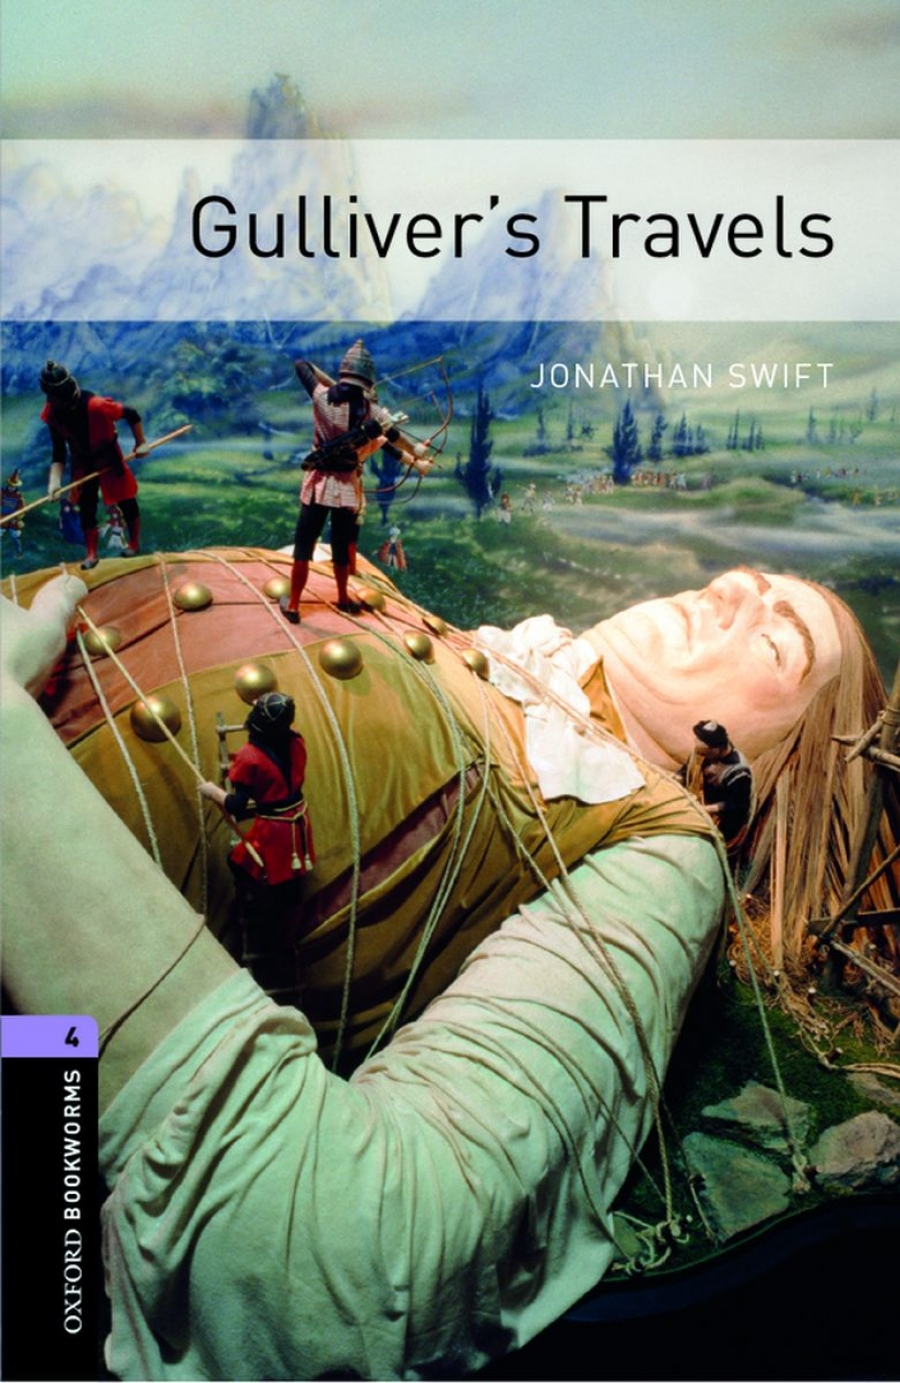 Jonathan Swift, Retold by Clare West OBL 4: Gulliver's Travels Audio CD Pack 